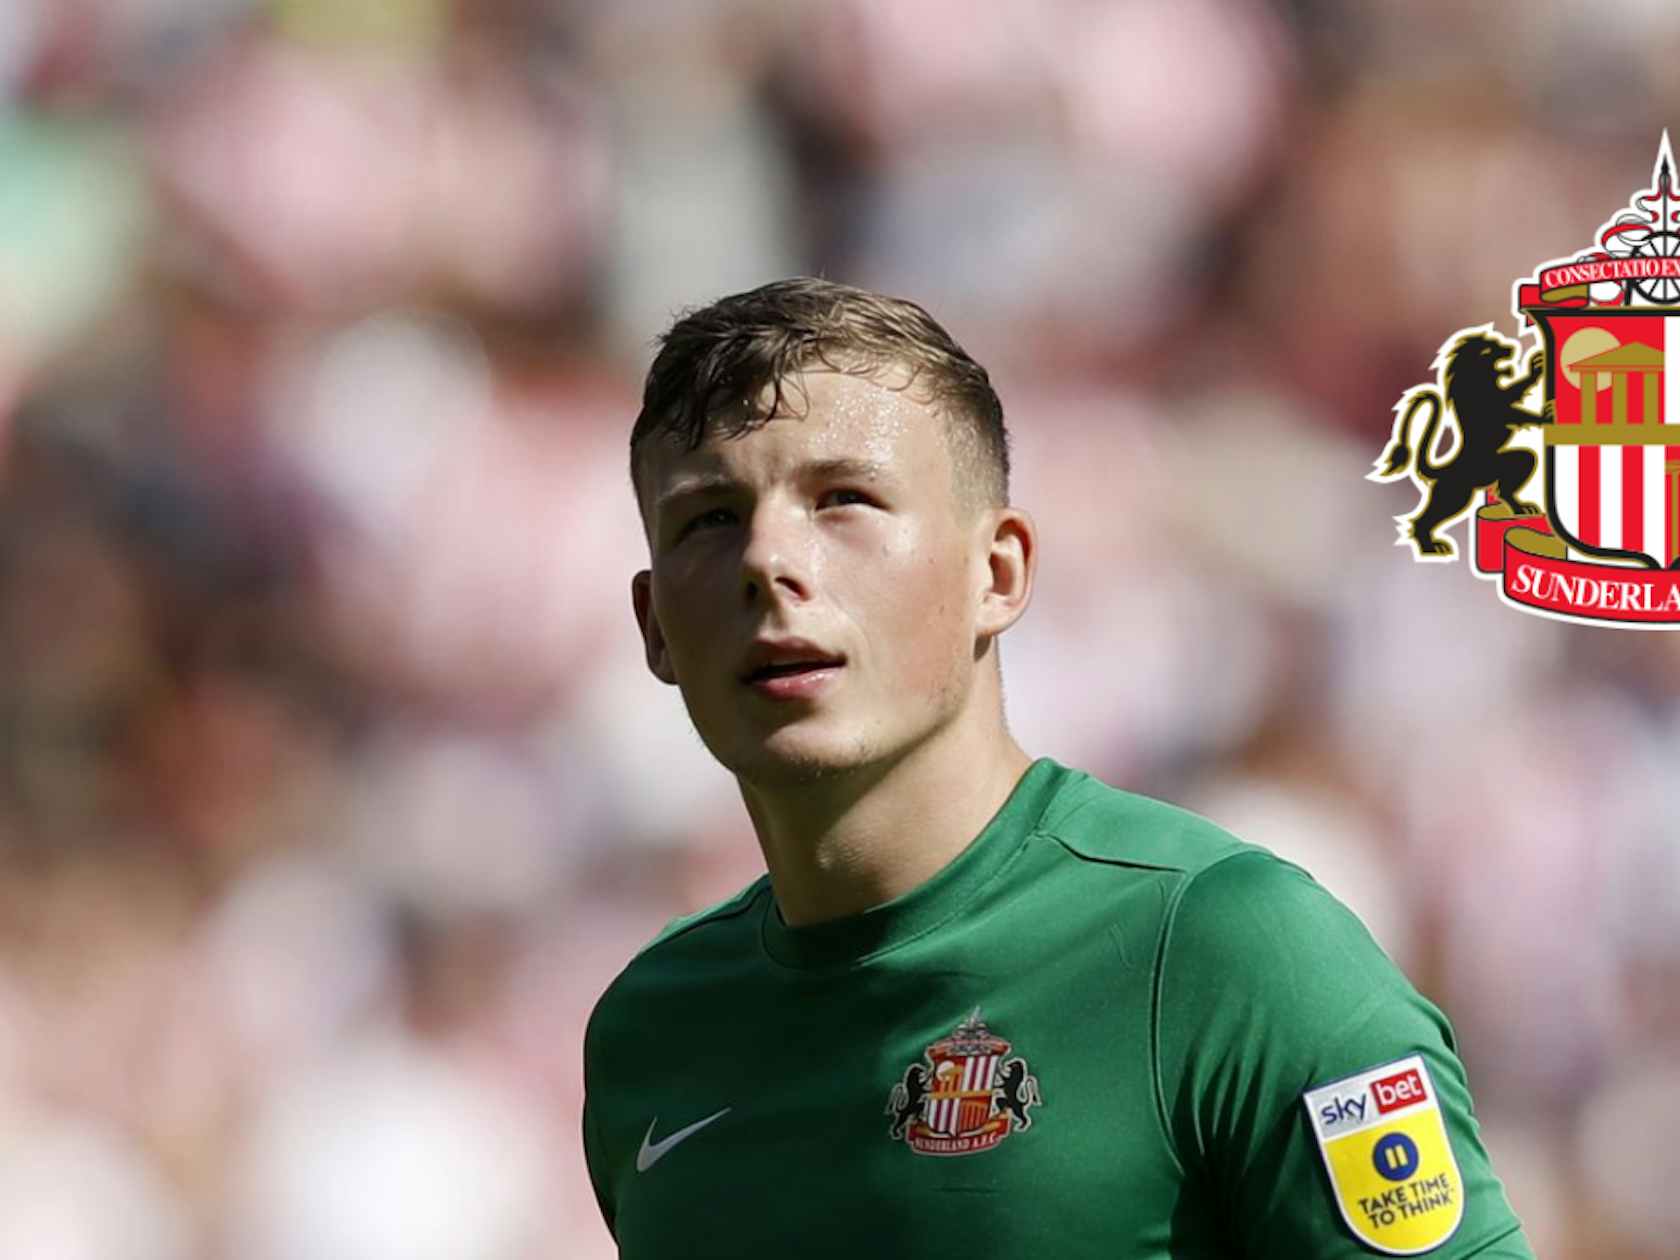 Sunderland goalkeeper Anthony Patterson commits his future to the club by signing a new long-term contract